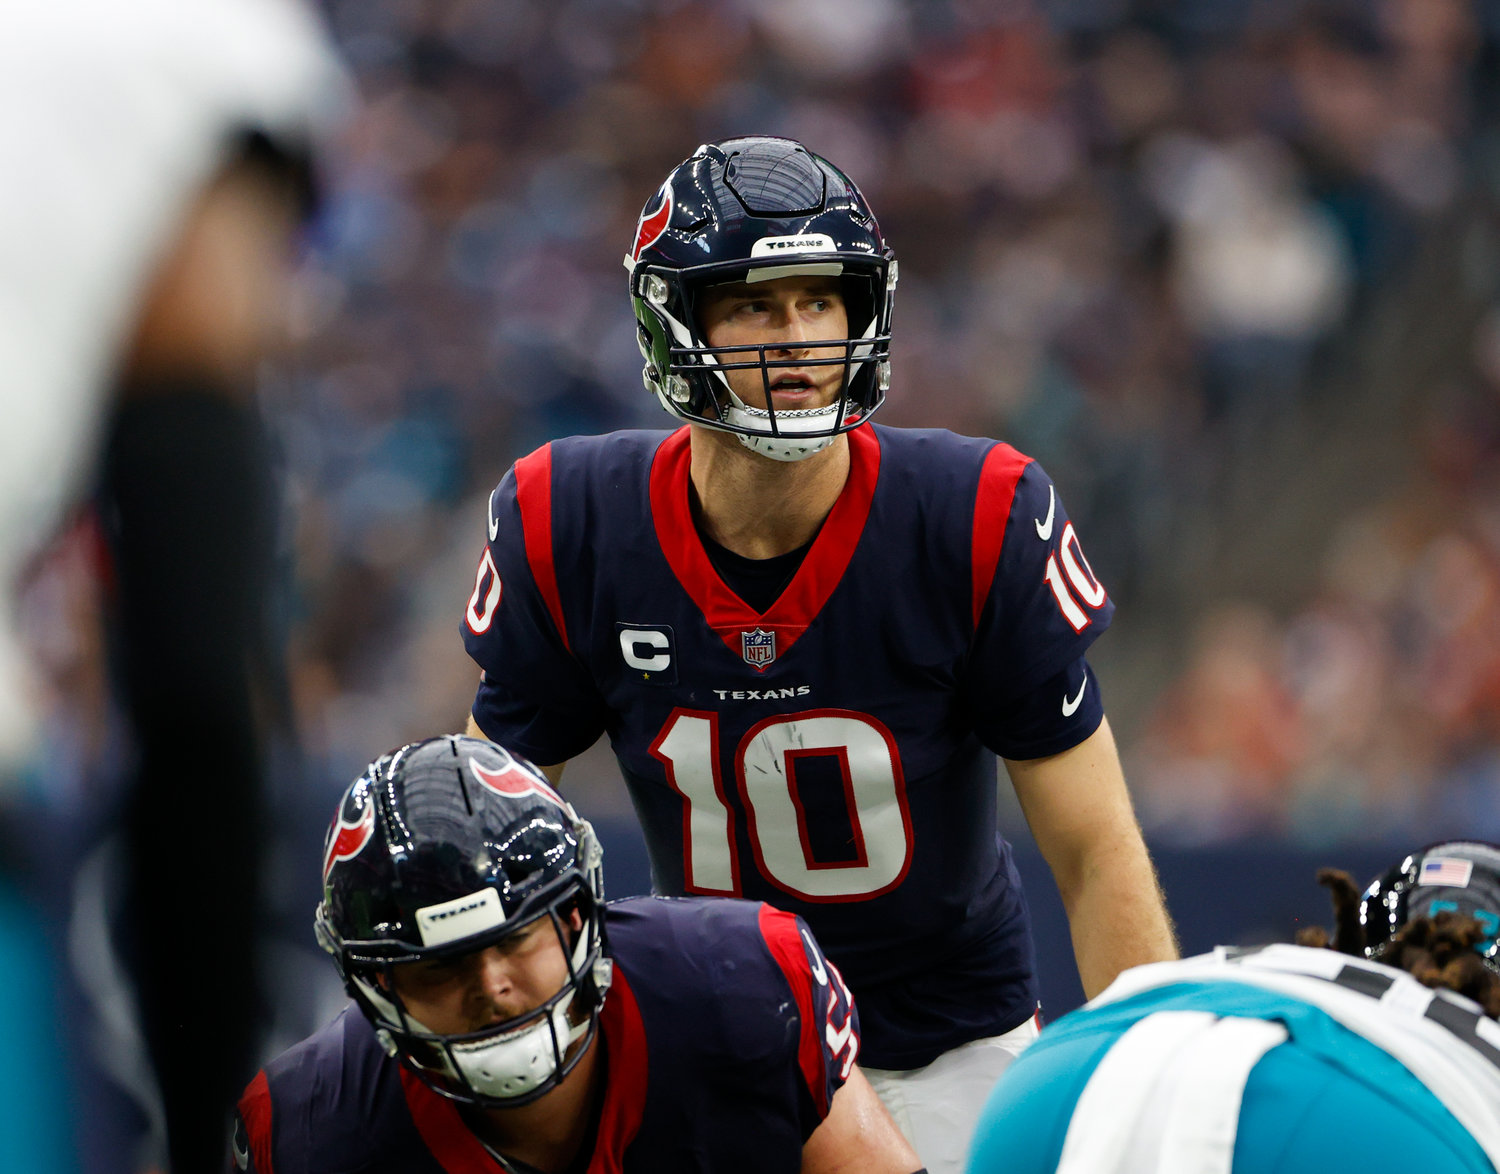 Texans quarterback Davis Mills (10) during an NFL game between the Houston Texans and the Jacksonville Jaguars on Jan. 1, 2023 in Houston. The Jaguars won, 31-3.